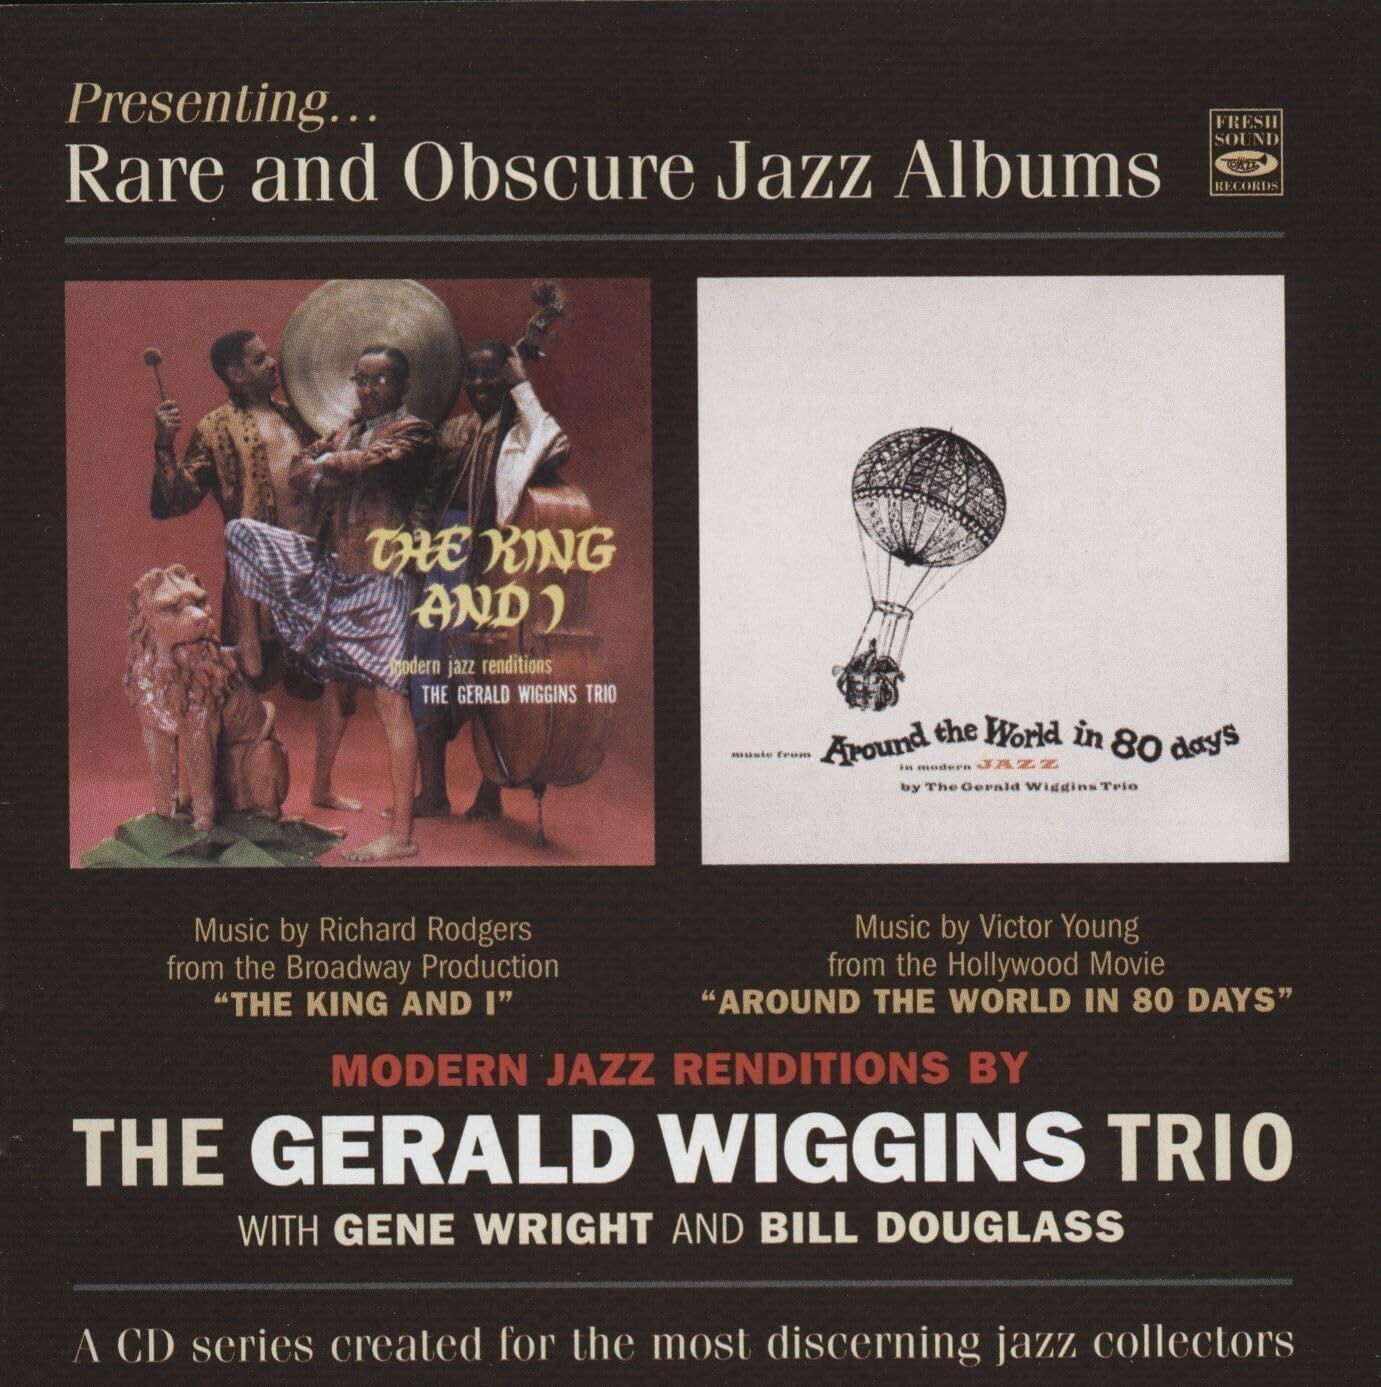 GERALD WIGGINS TRIO - Presenting Rare And Obscure Jazz Albums